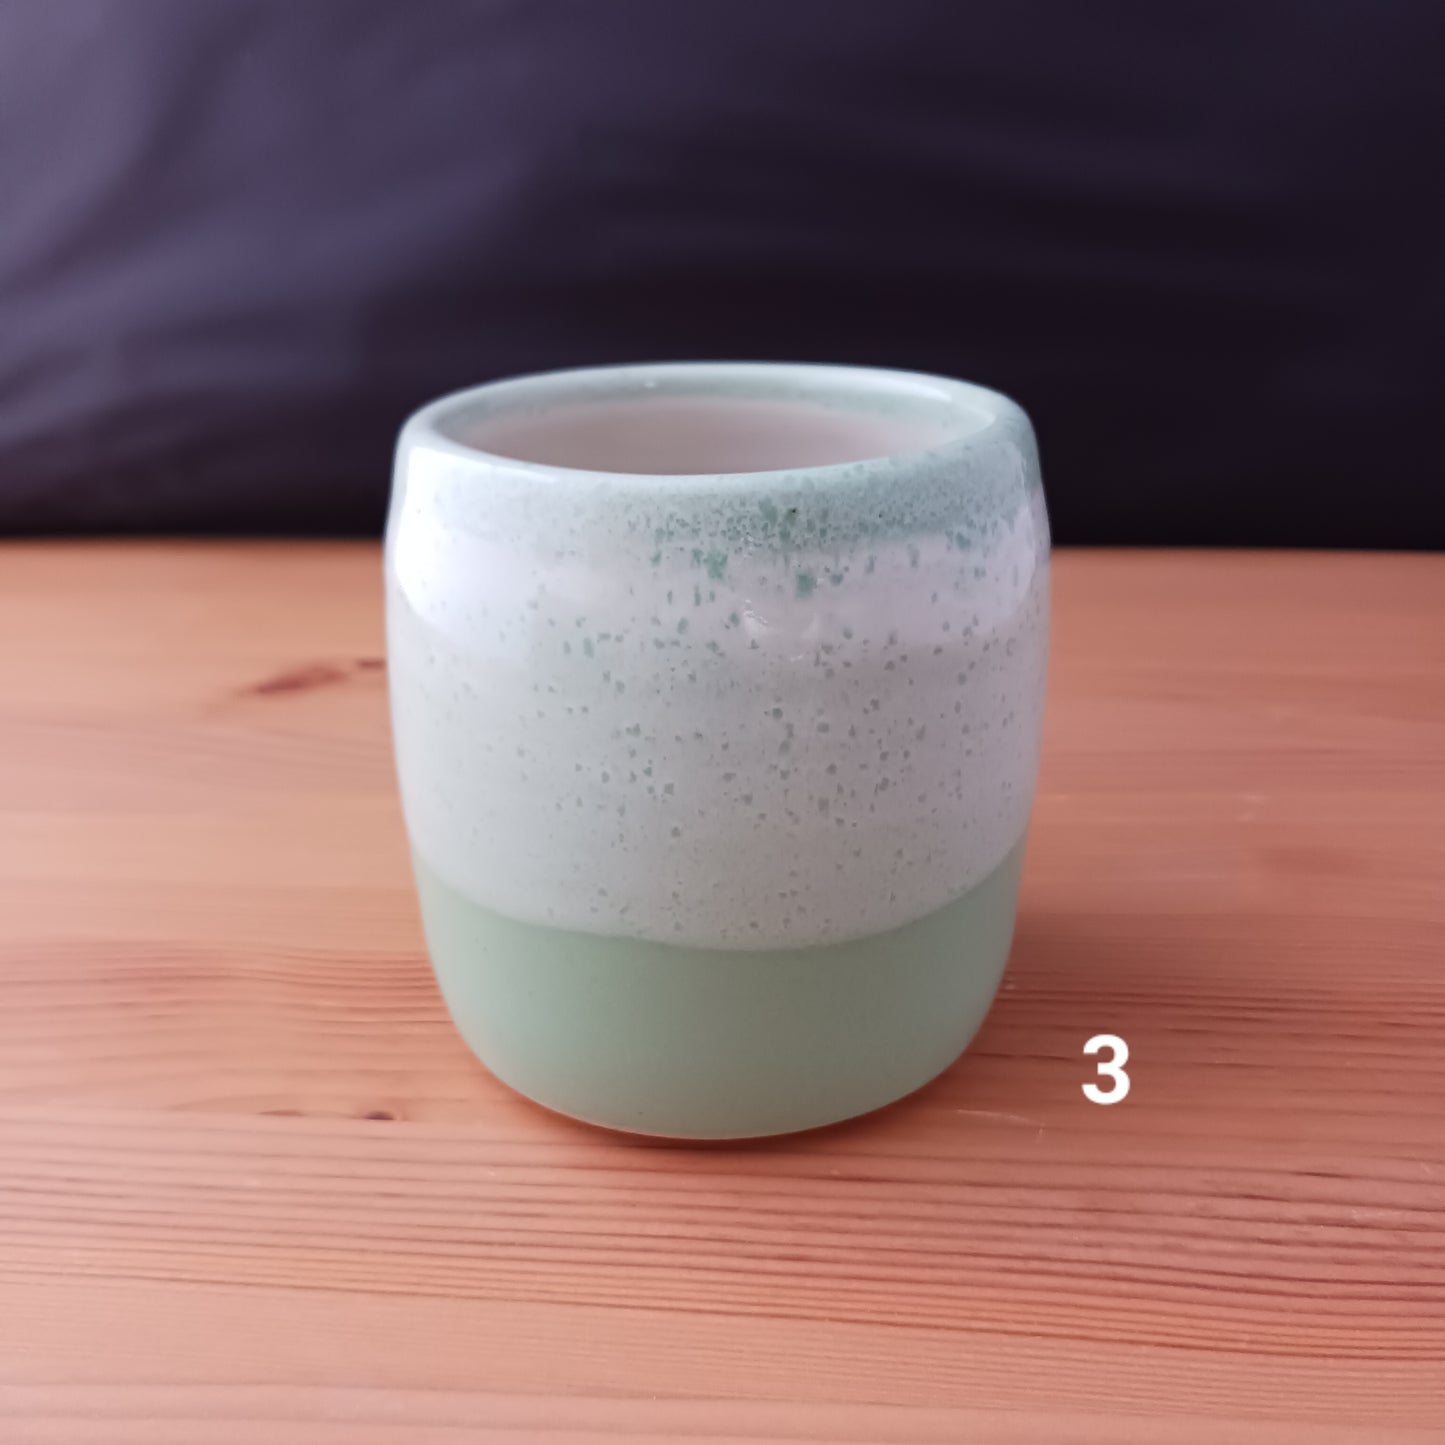 Foamy Sea green goblet collection